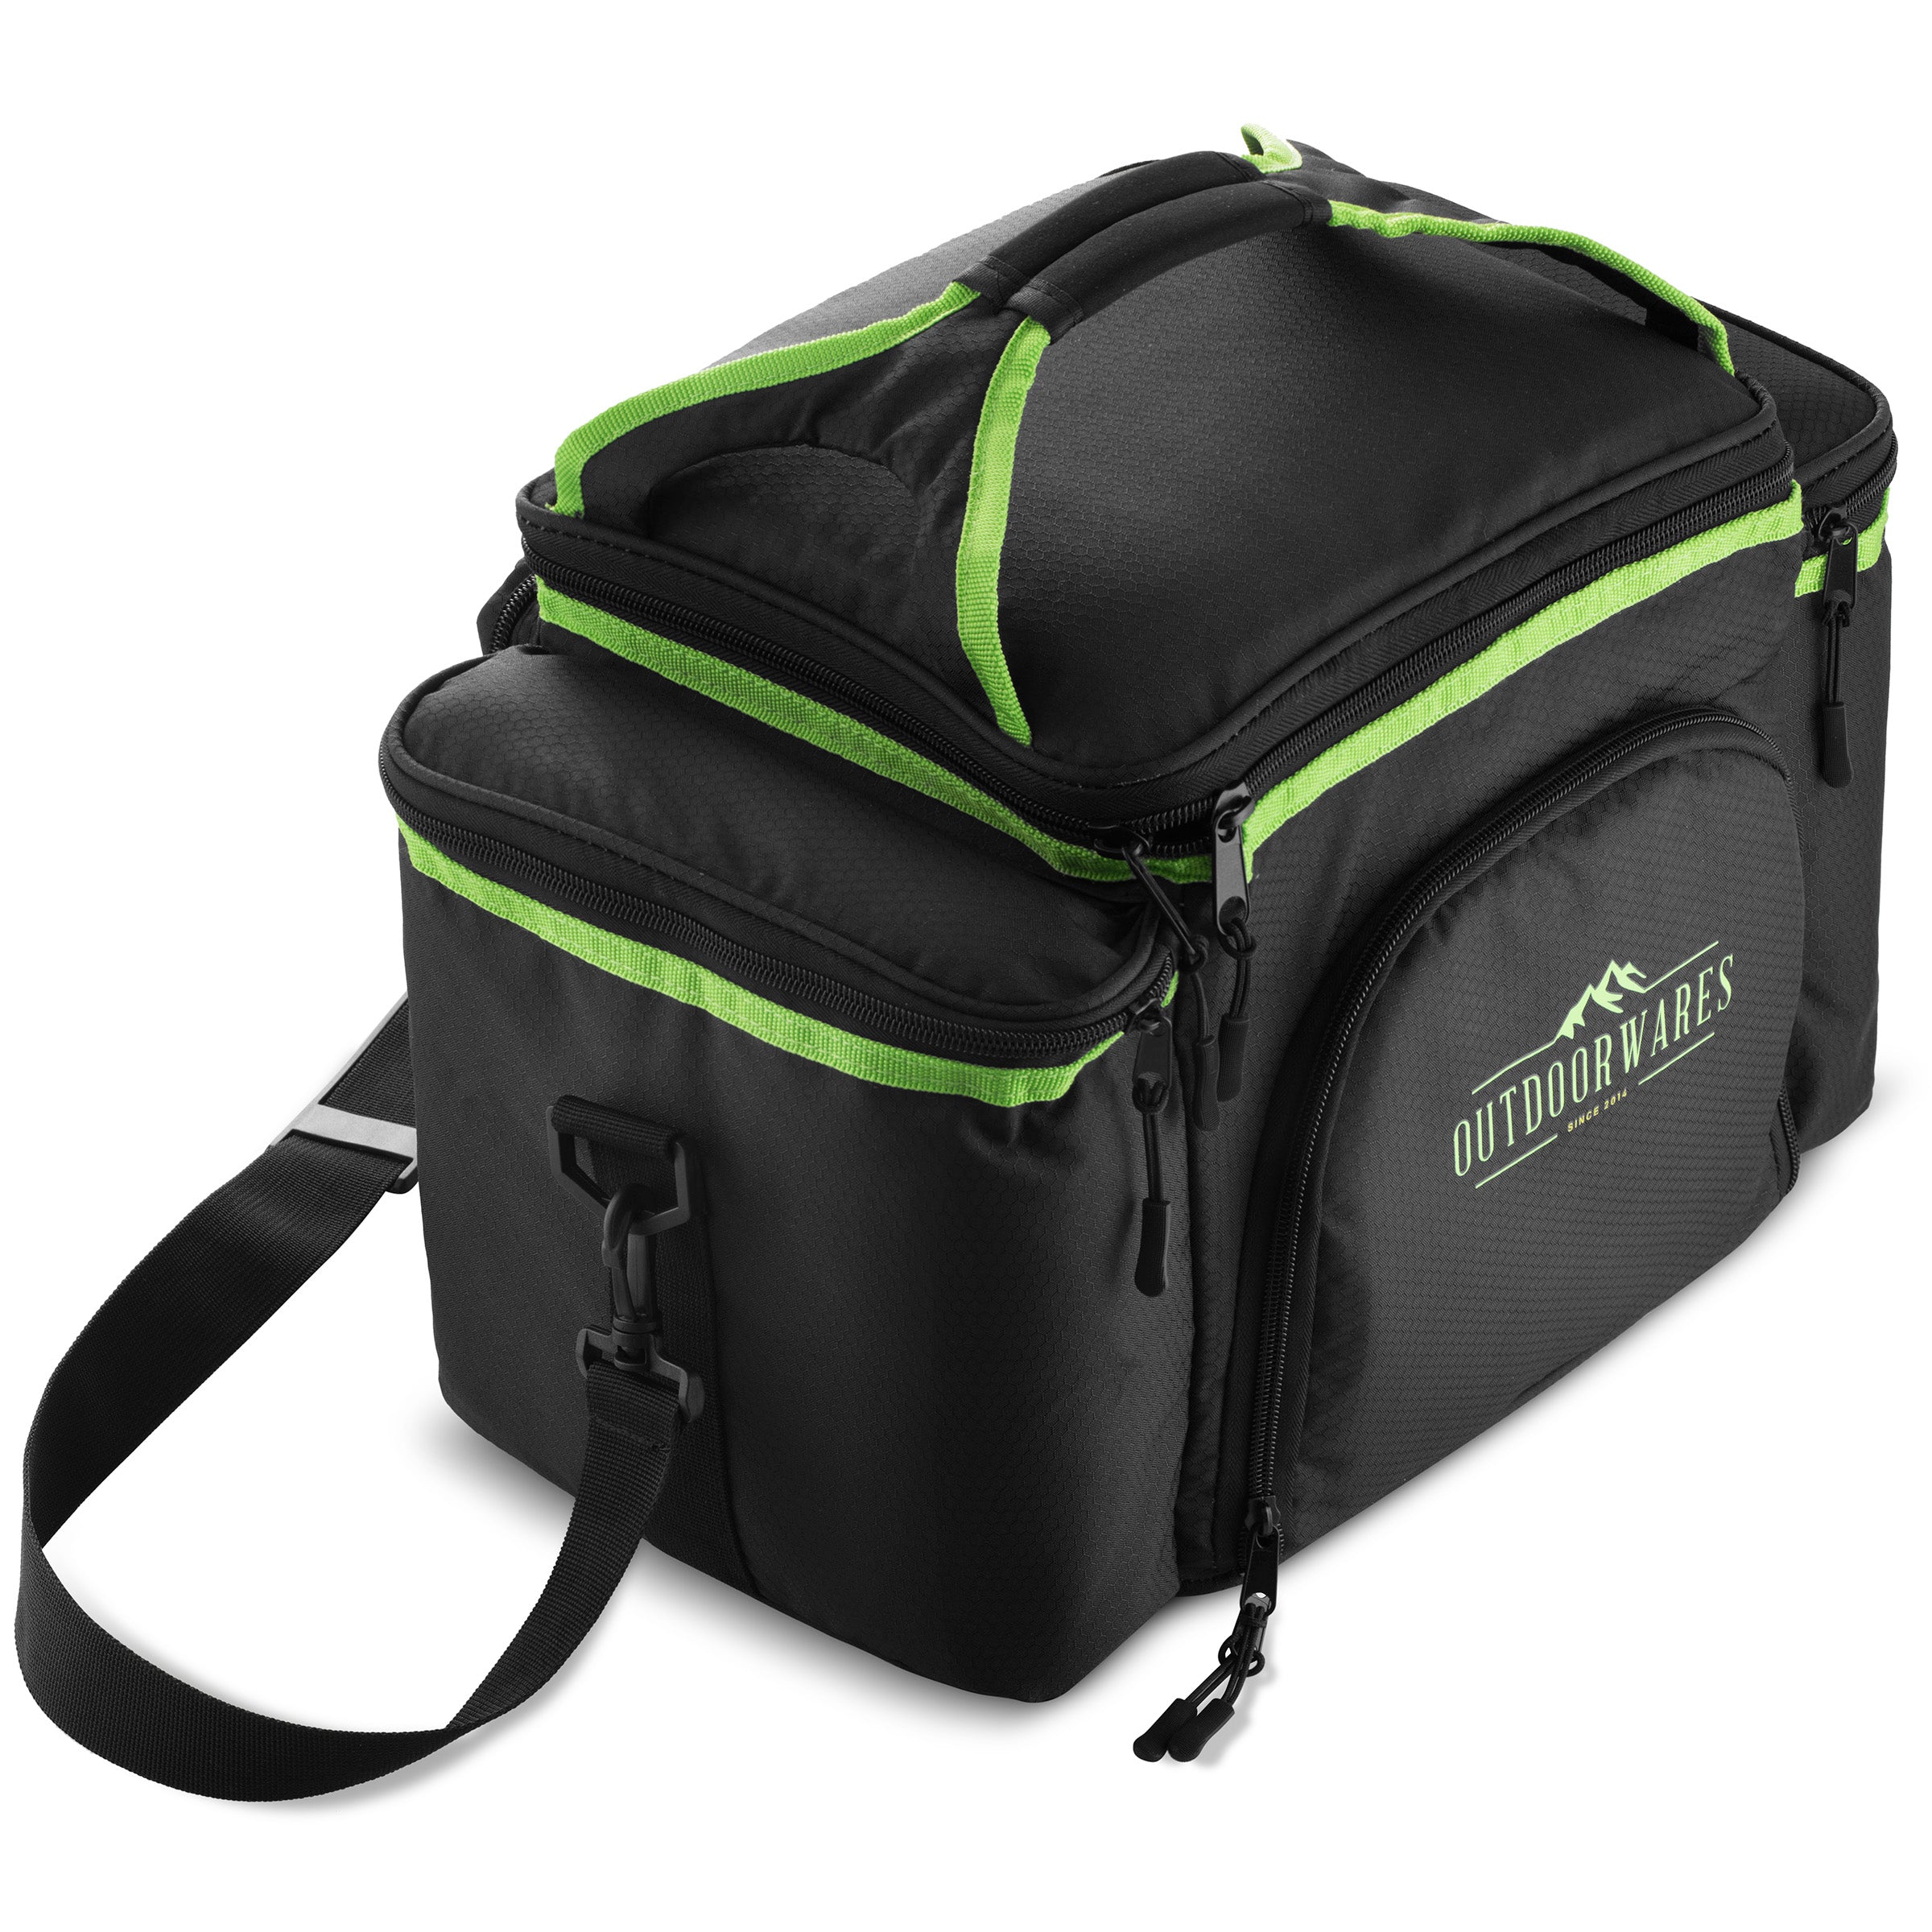 Cooler Bag Insulated By Outdoorwares Large Capacity Durable, To Keep F 